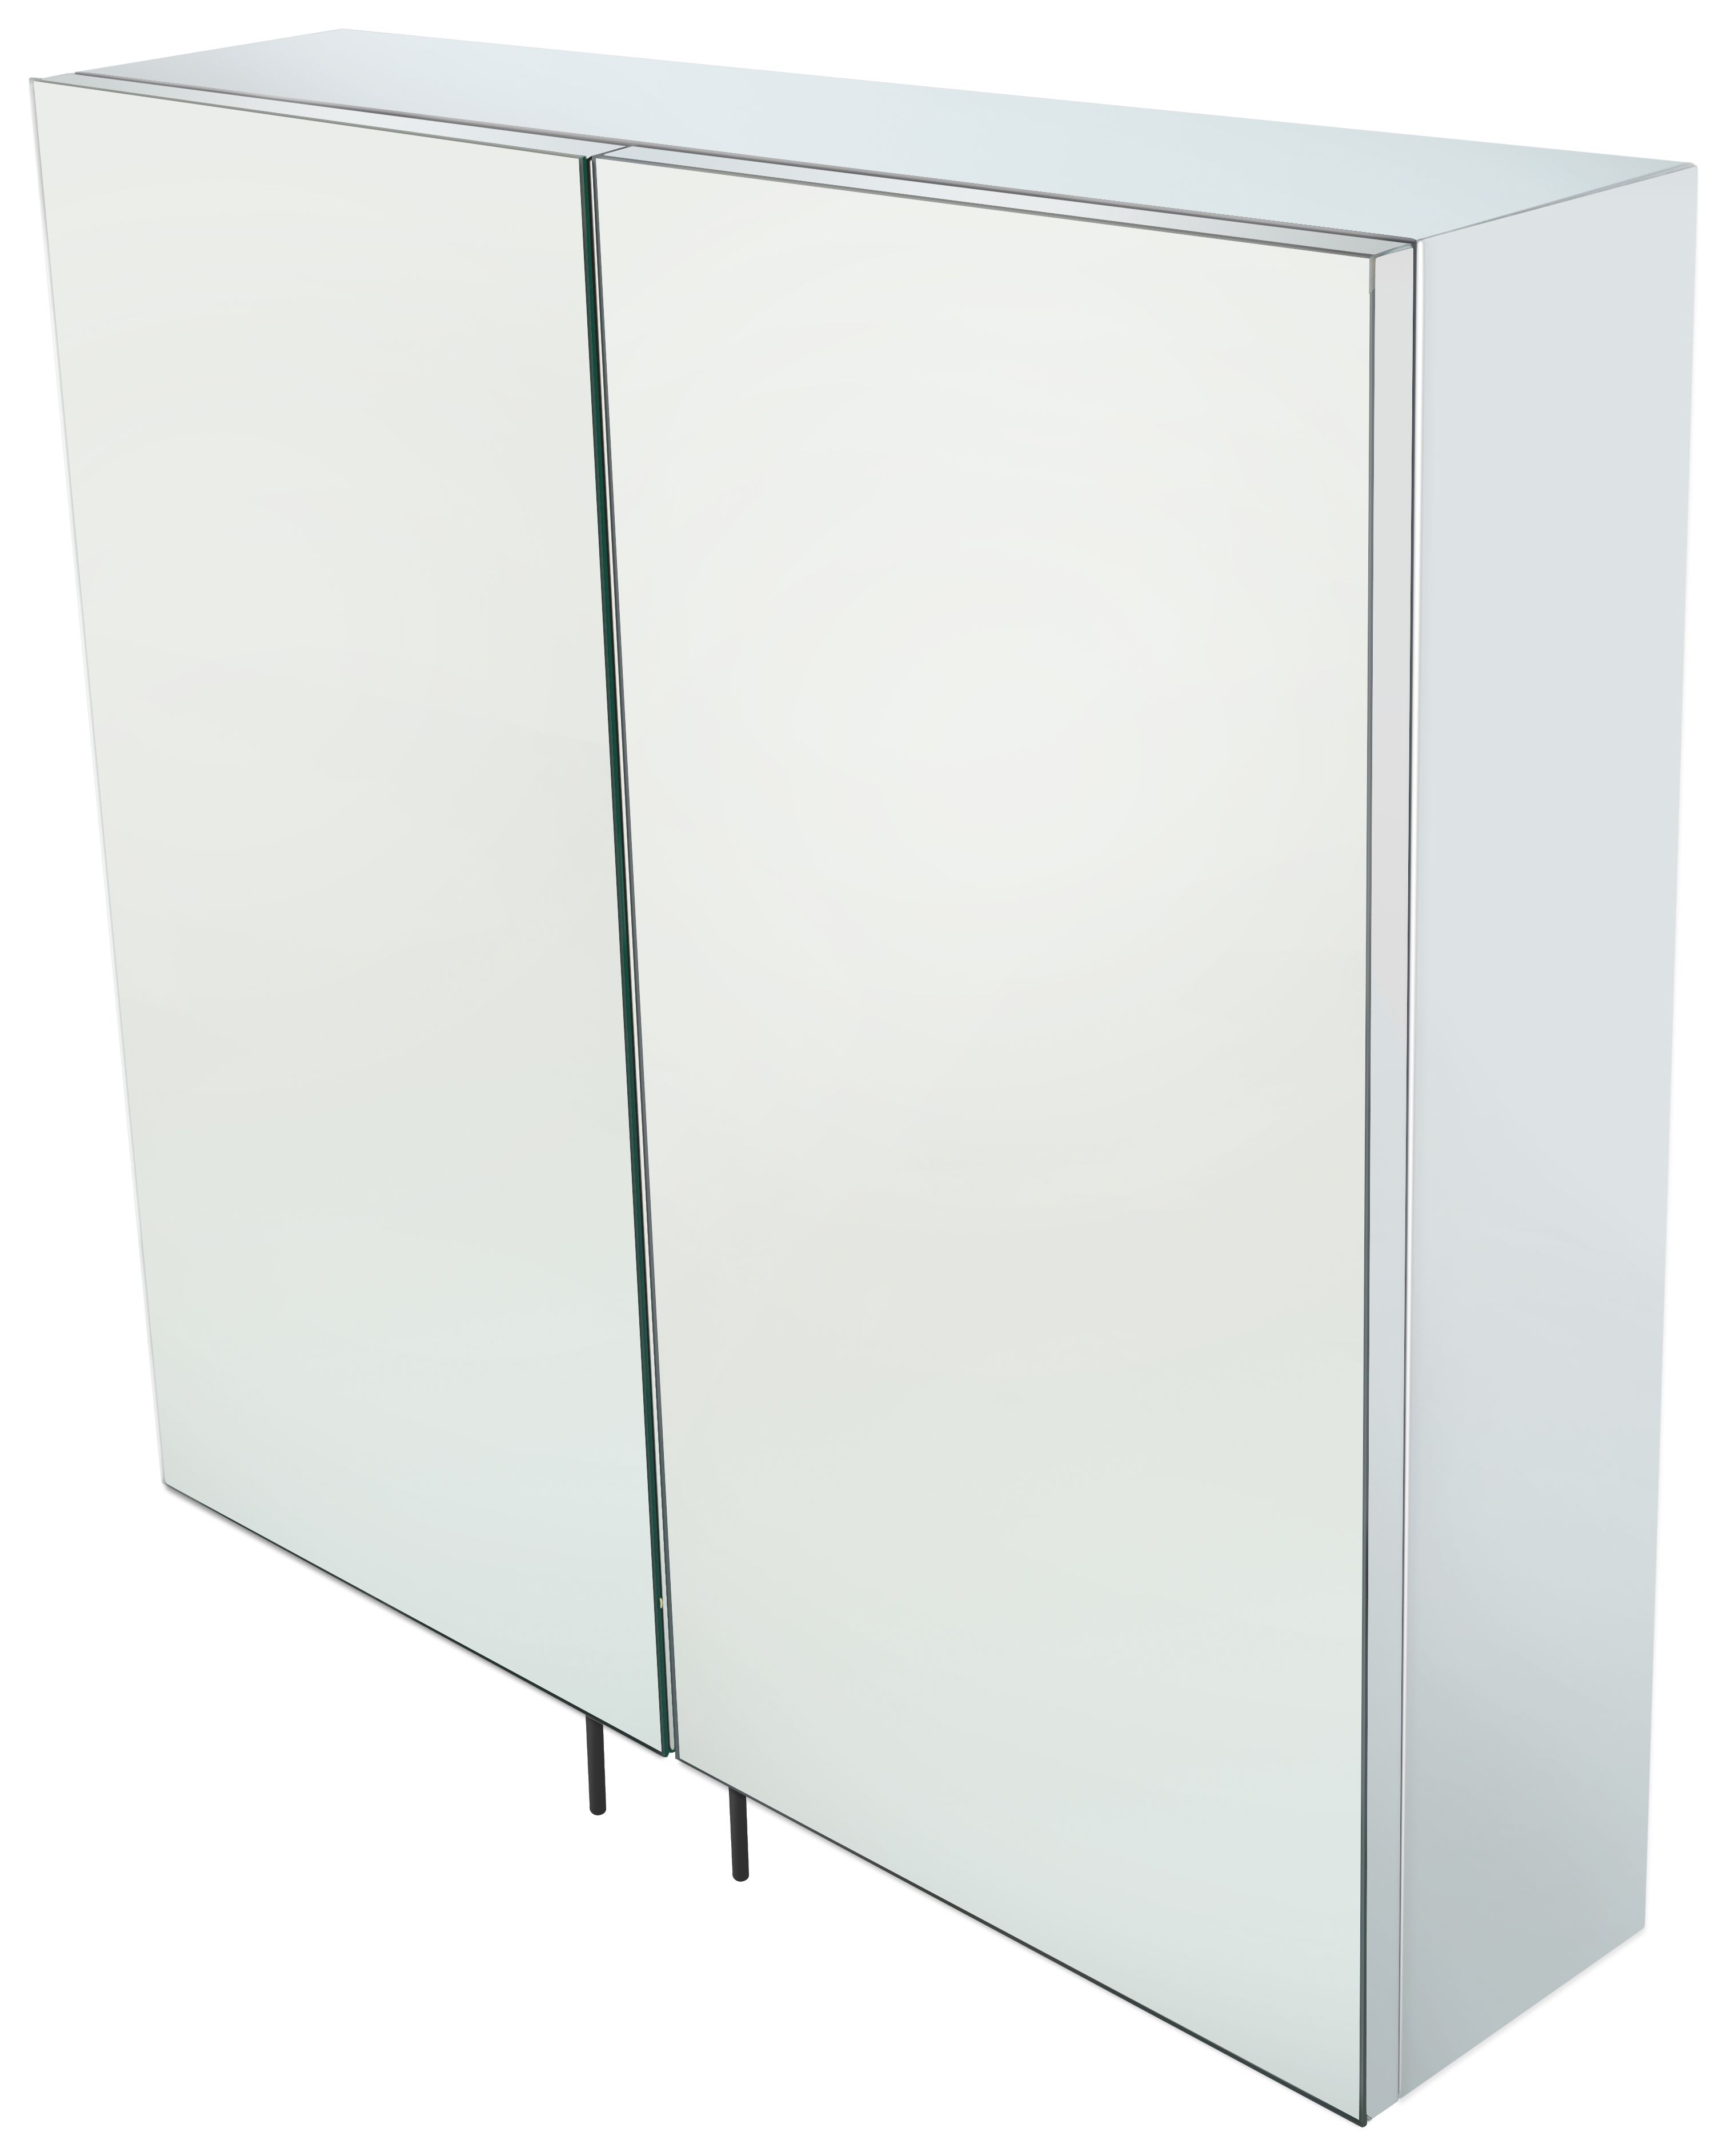 Image of Wickes Stainless Steel Double Bathroom Cabinet 600 X 550mm